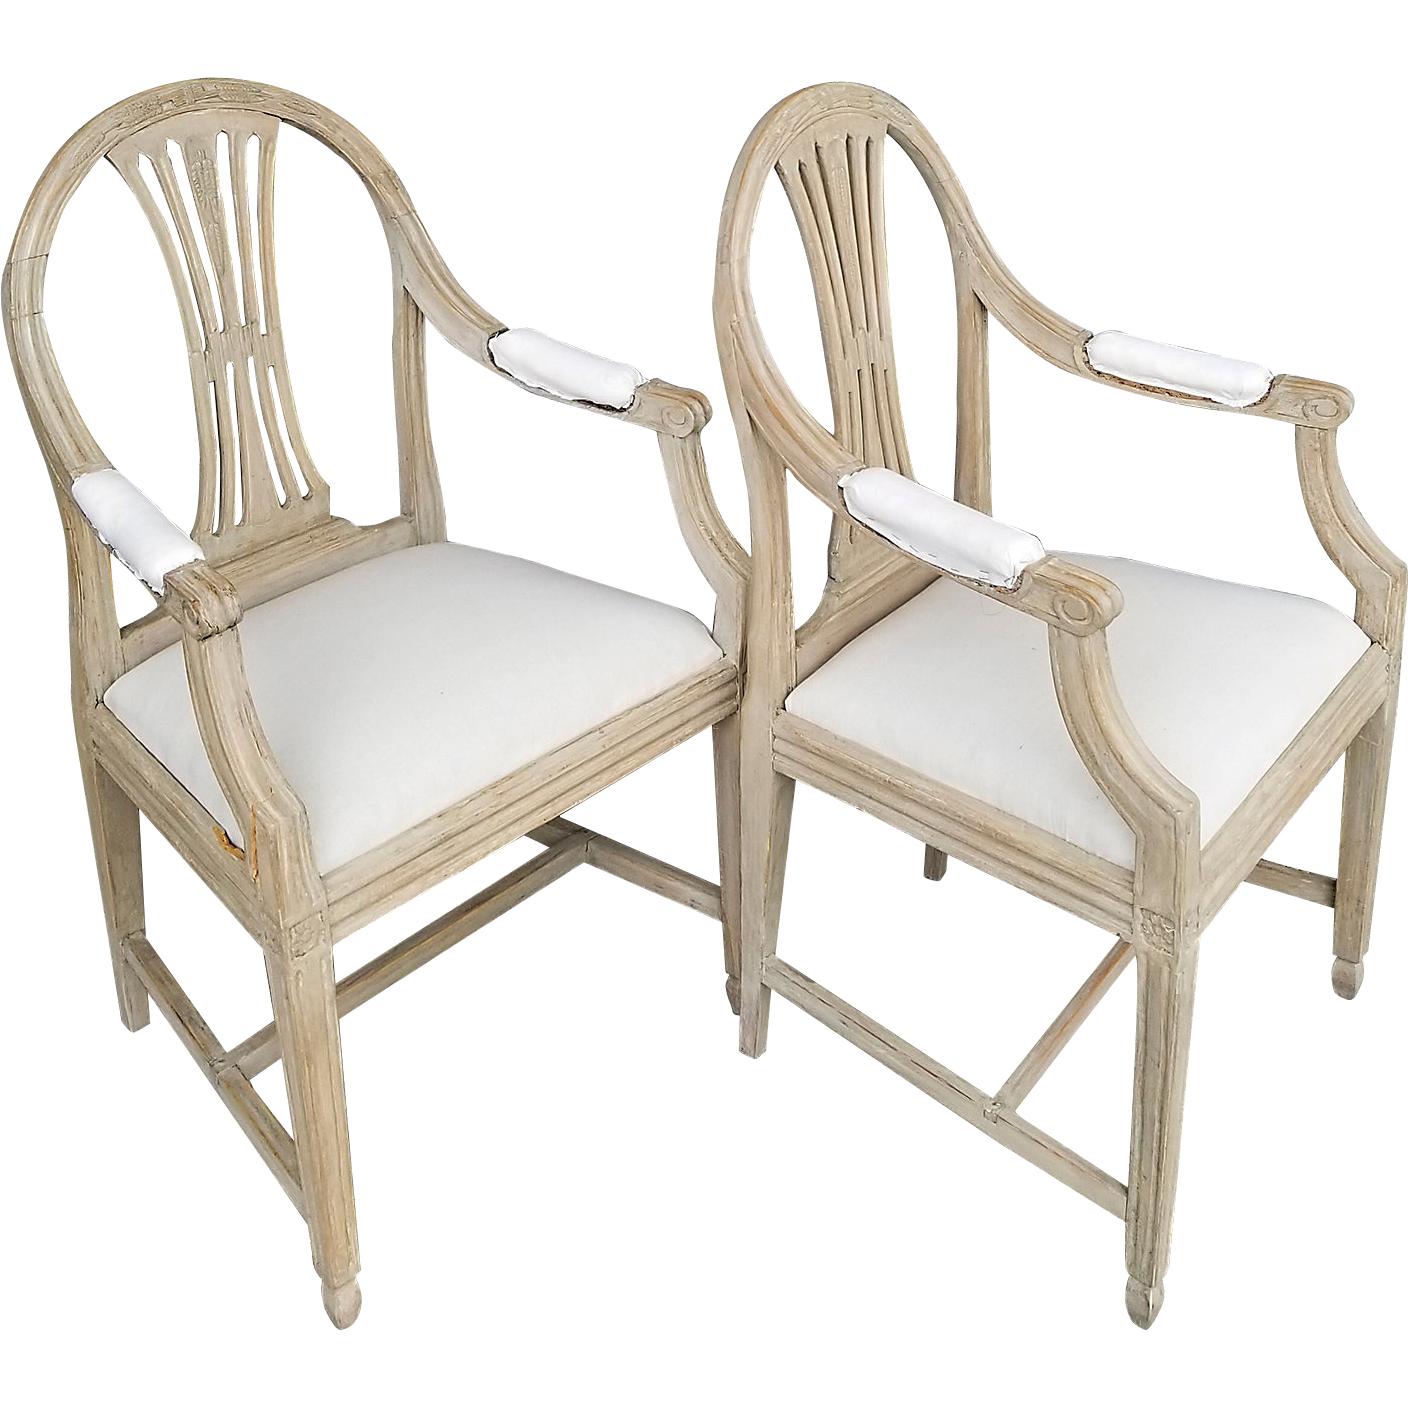 Pair of Swedish Armchairs with Wheat Sheaf Motif